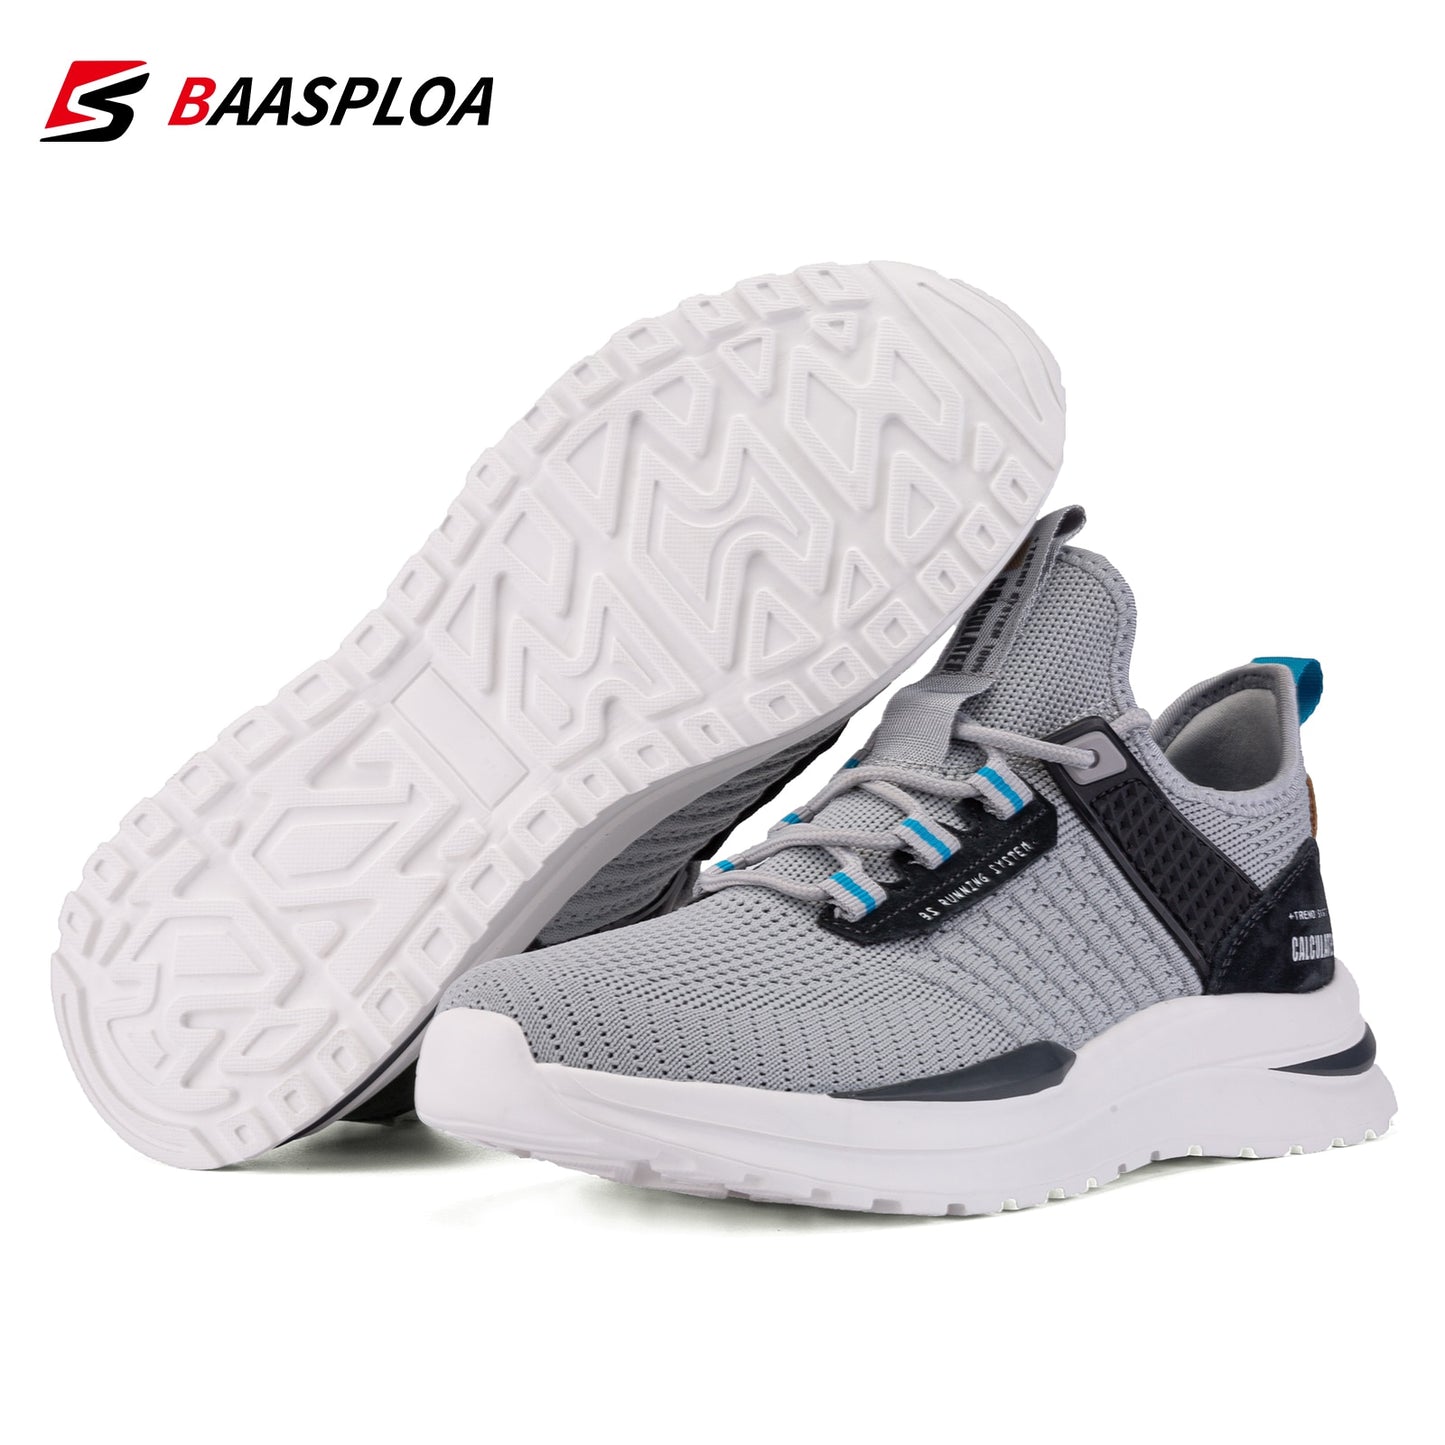 Men's Sport Sneaker Lightweight Casual Shoes Comfortable Mesh Running Shoe Male Breathable Tenis Walking Shoes The Clothing Company Sydney